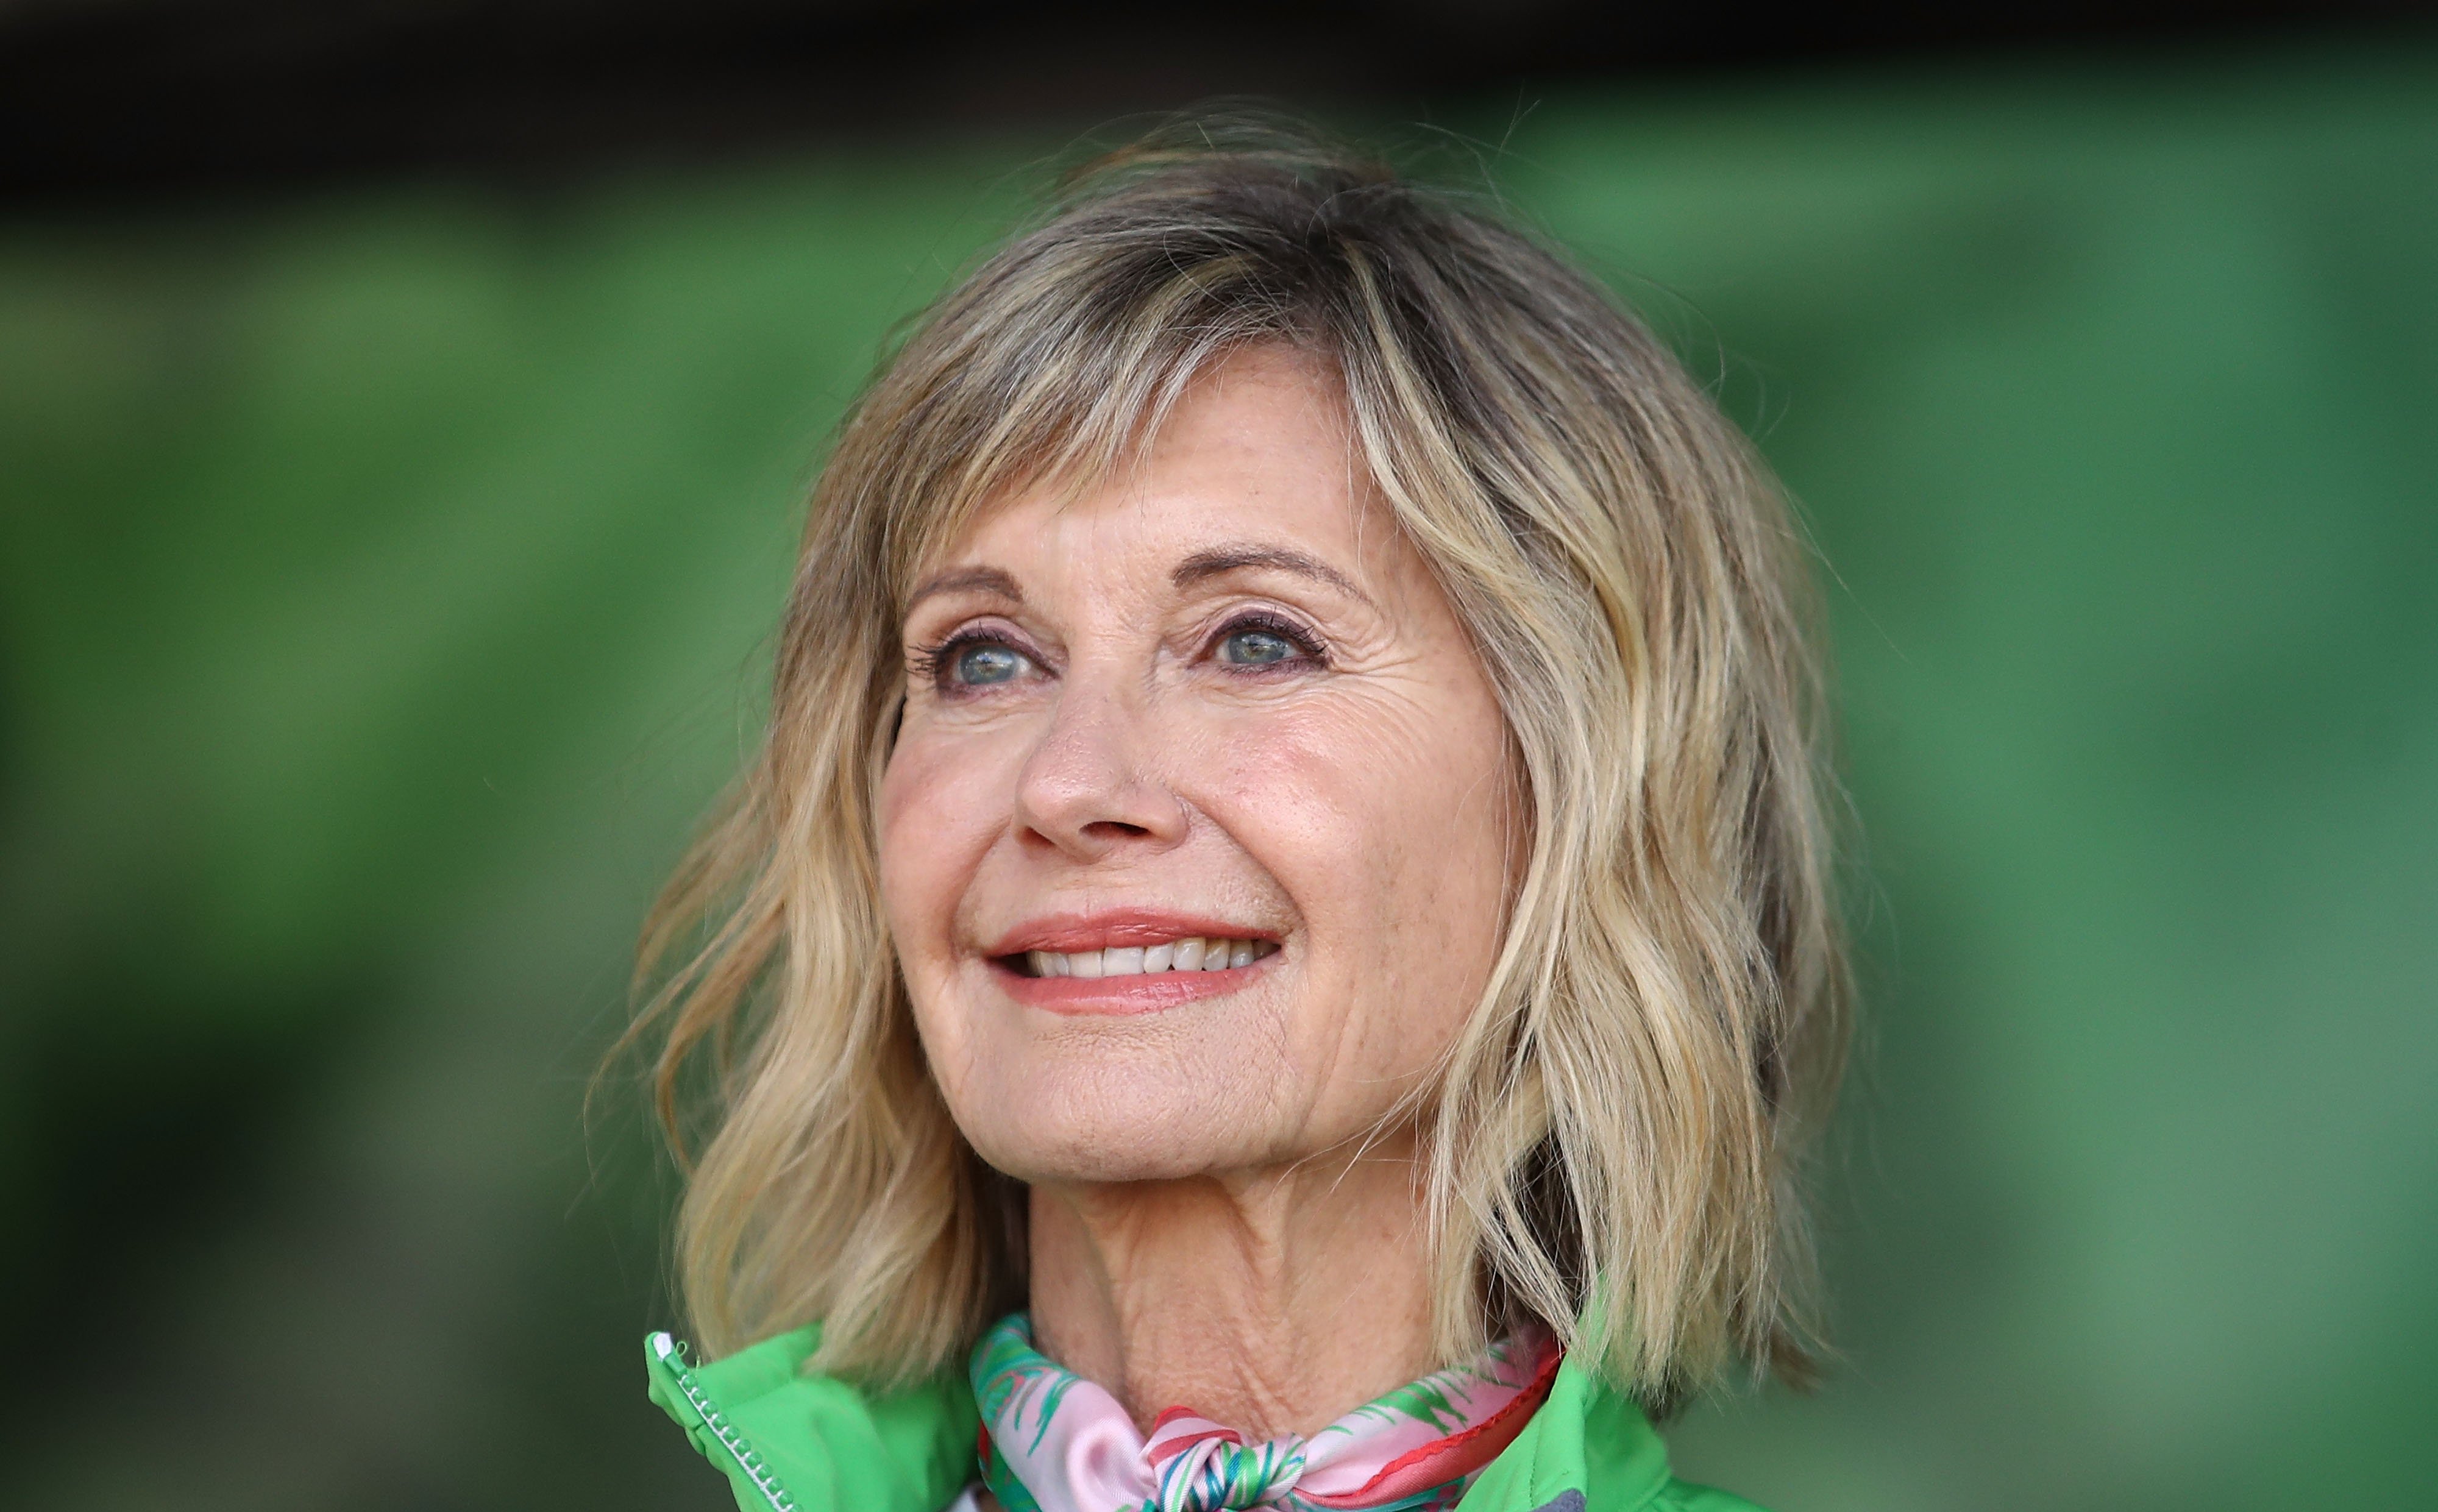 Olivia Newton-John at the annual Wellness Walk and Research Runon September 16, 2018 | Photo: Getty Images